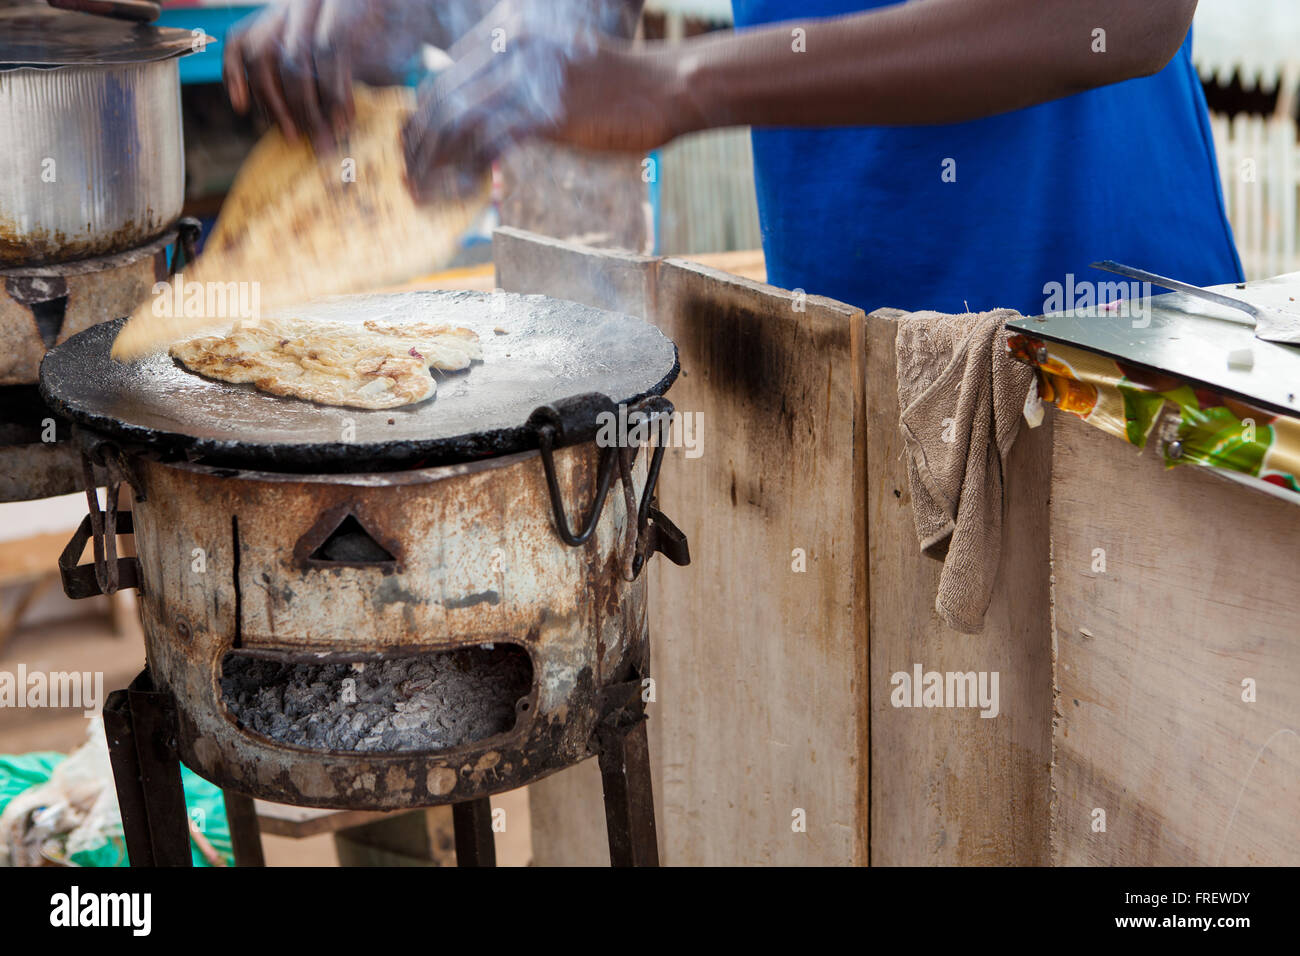 Chapatis being cooked on a stove, Uganda Africa Stock Photo